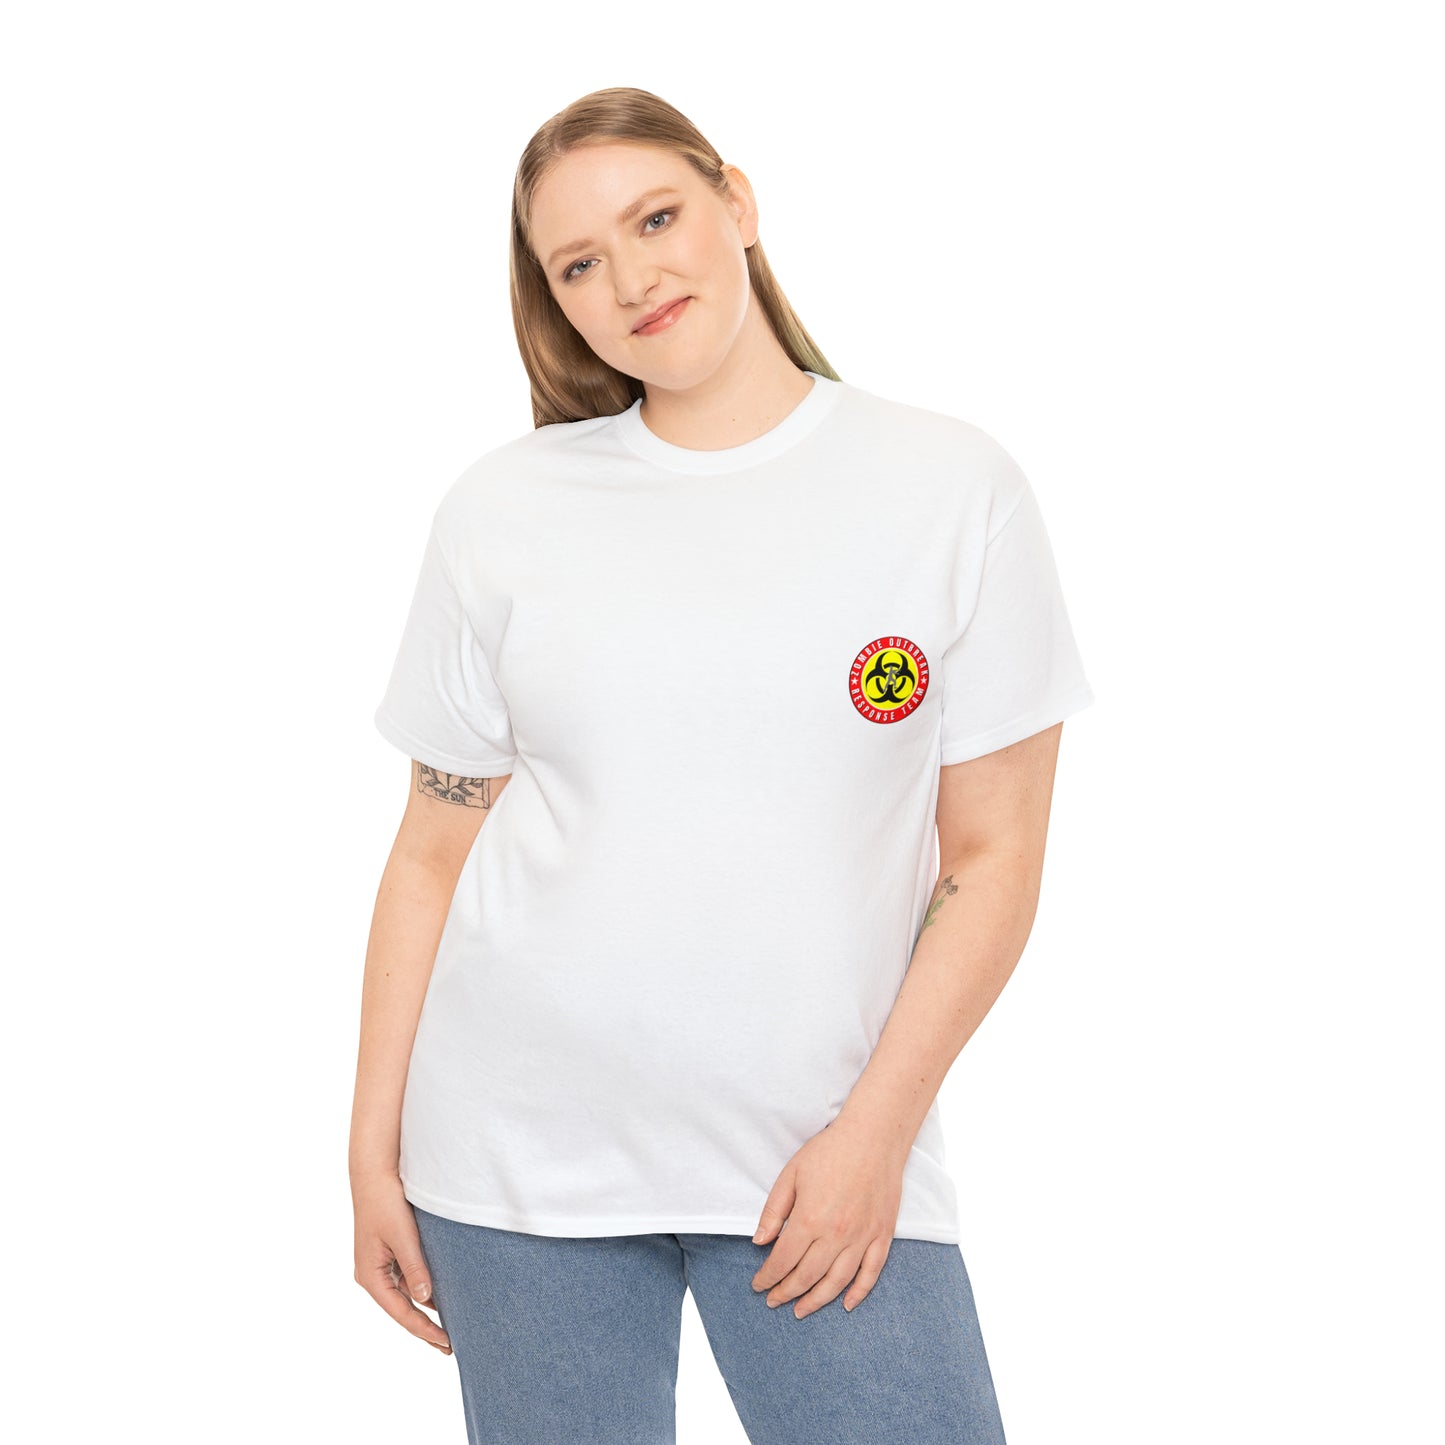 Zombie Outbreak - Response Team (model A) printed badge front/back Unisex Heavy Cotton Tee